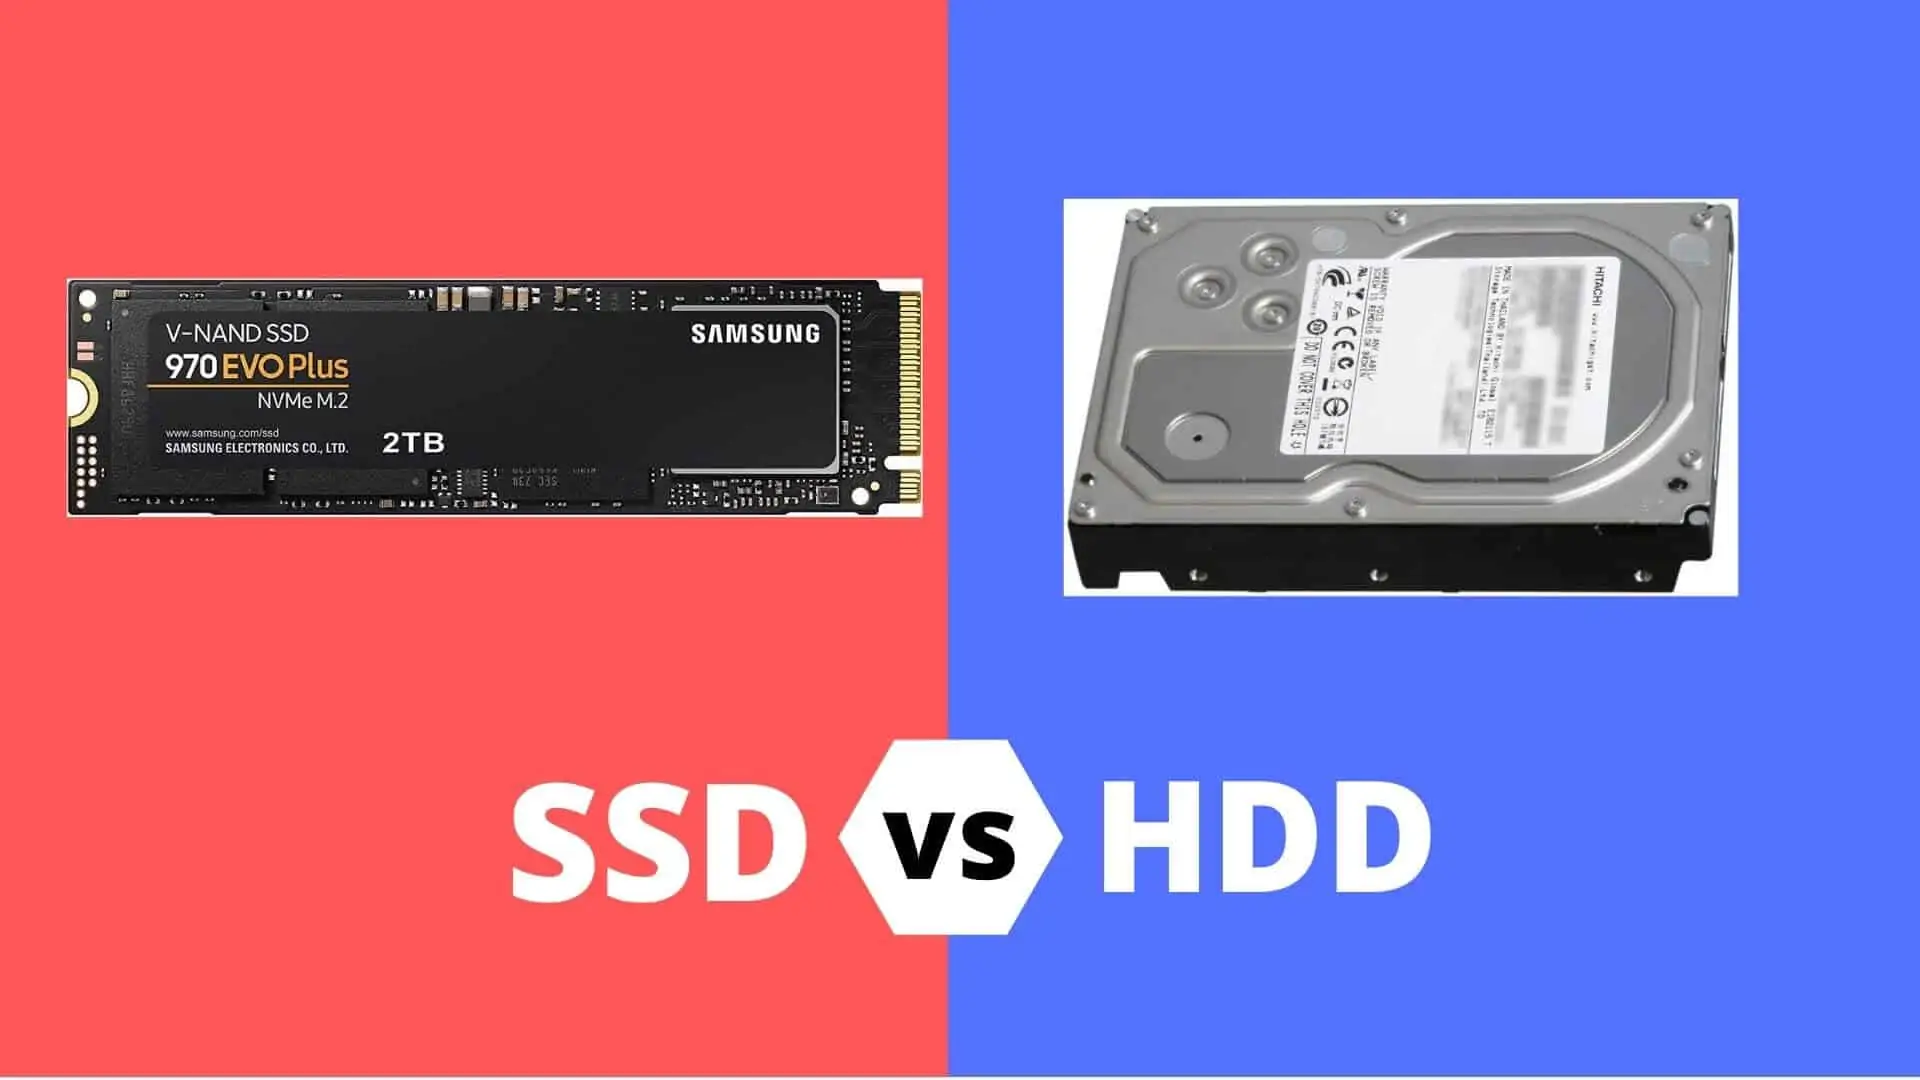 What is the difference between SSD and HDD